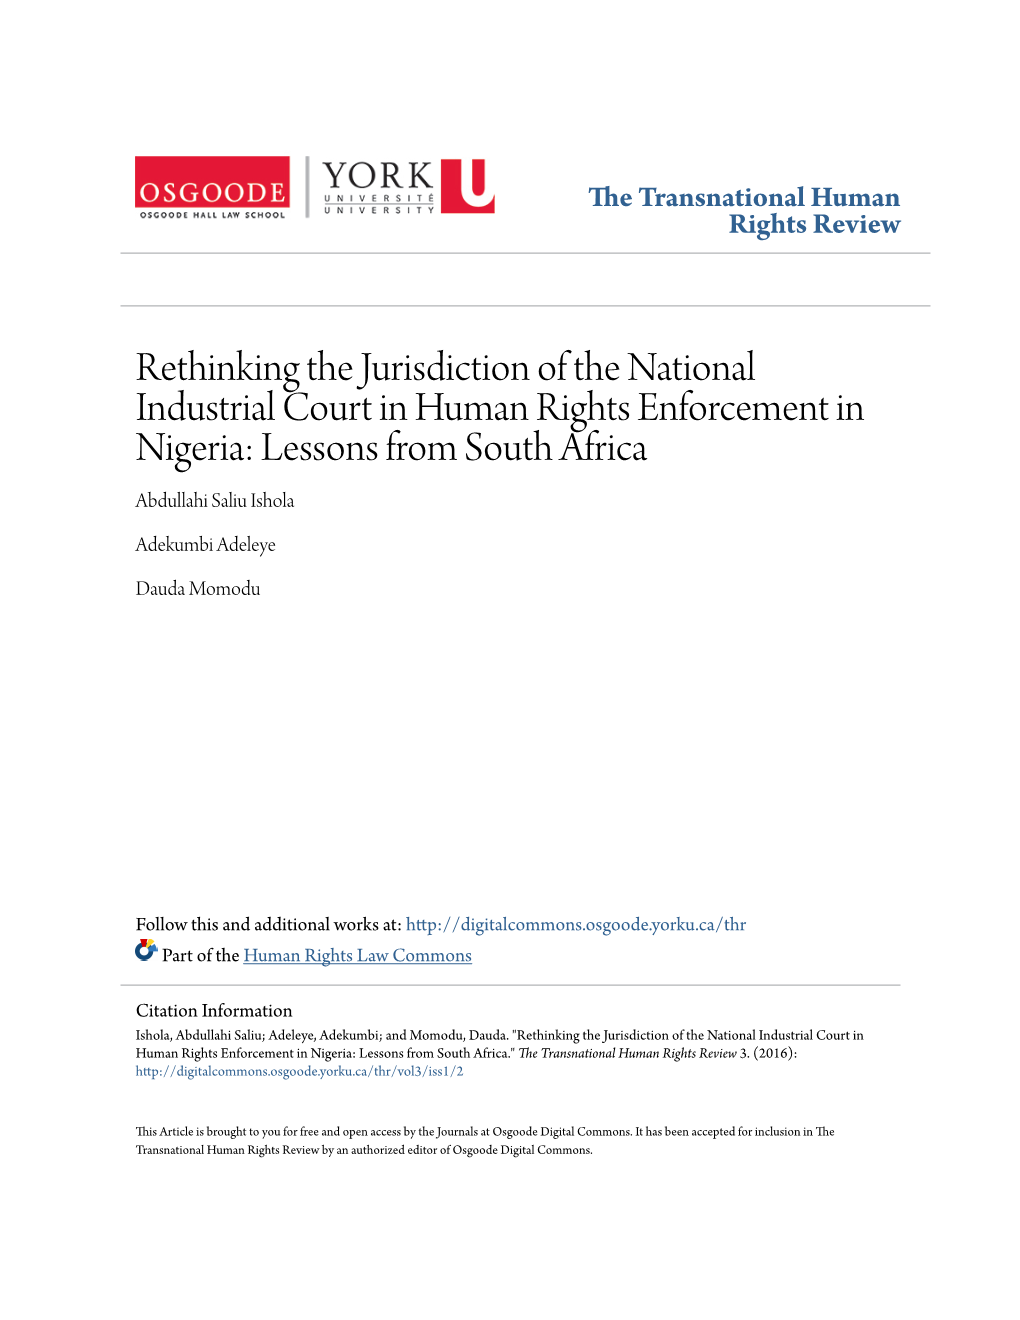 Rethinking the Jurisdiction of the National Industrial Court in Human Rights Enforcement in Nigeria: Lessons from South Africa Abdullahi Saliu Ishola